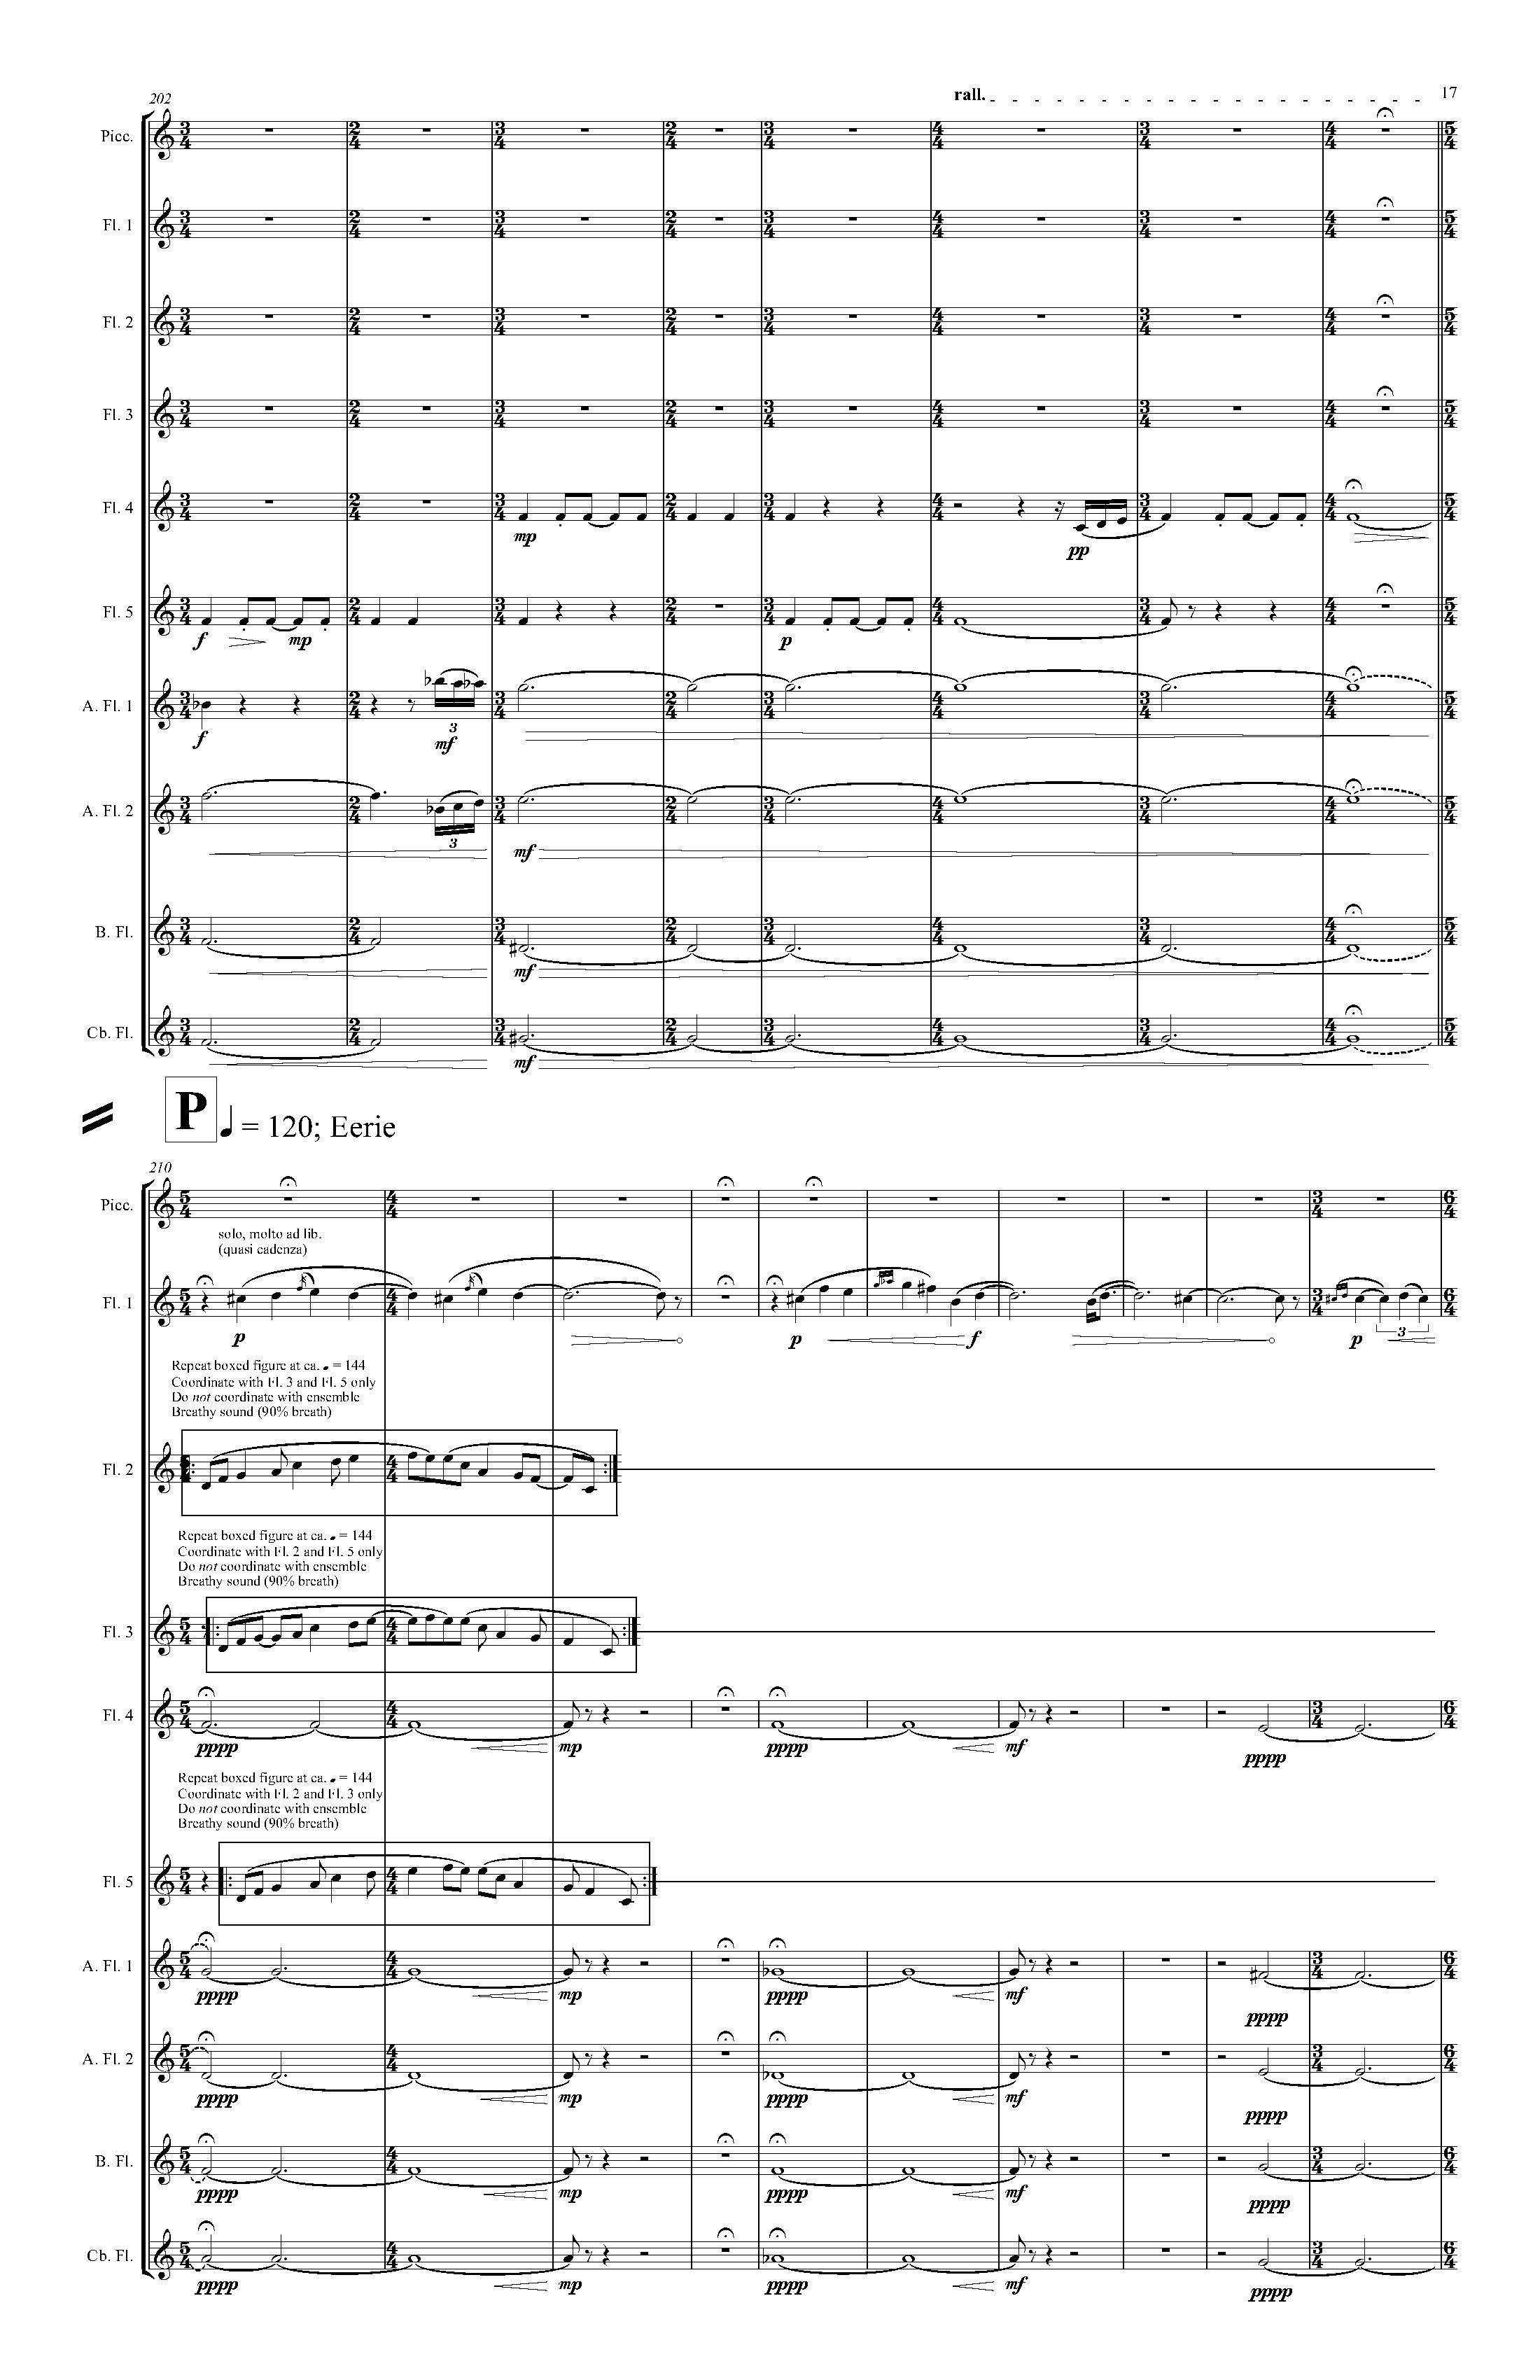 PIPES - Complete Score_Page_23.jpg